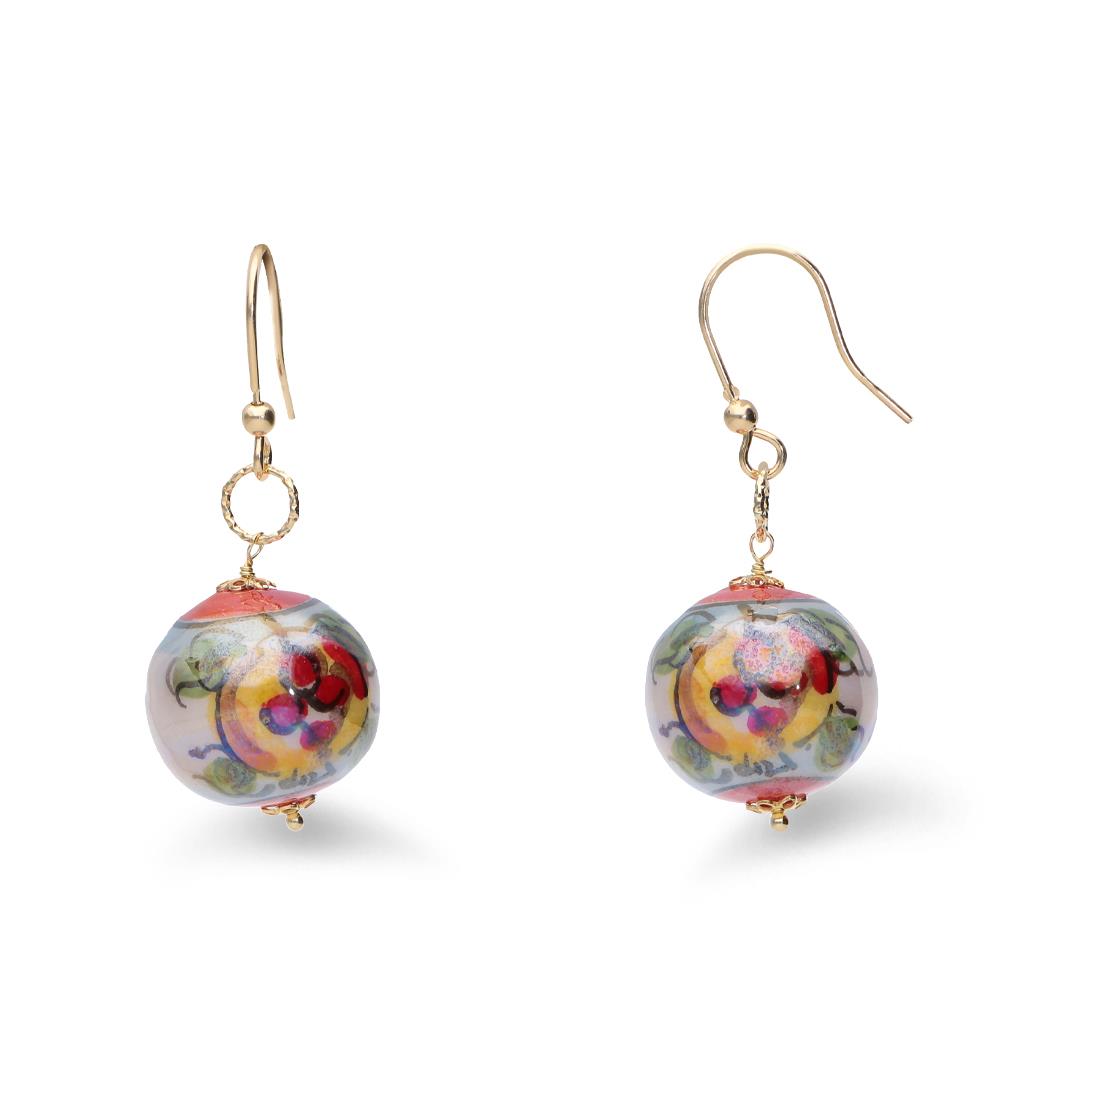 Pendant earrings in silver and ceramic with pomegranate - LE PERLE DI CALTAGIRONE